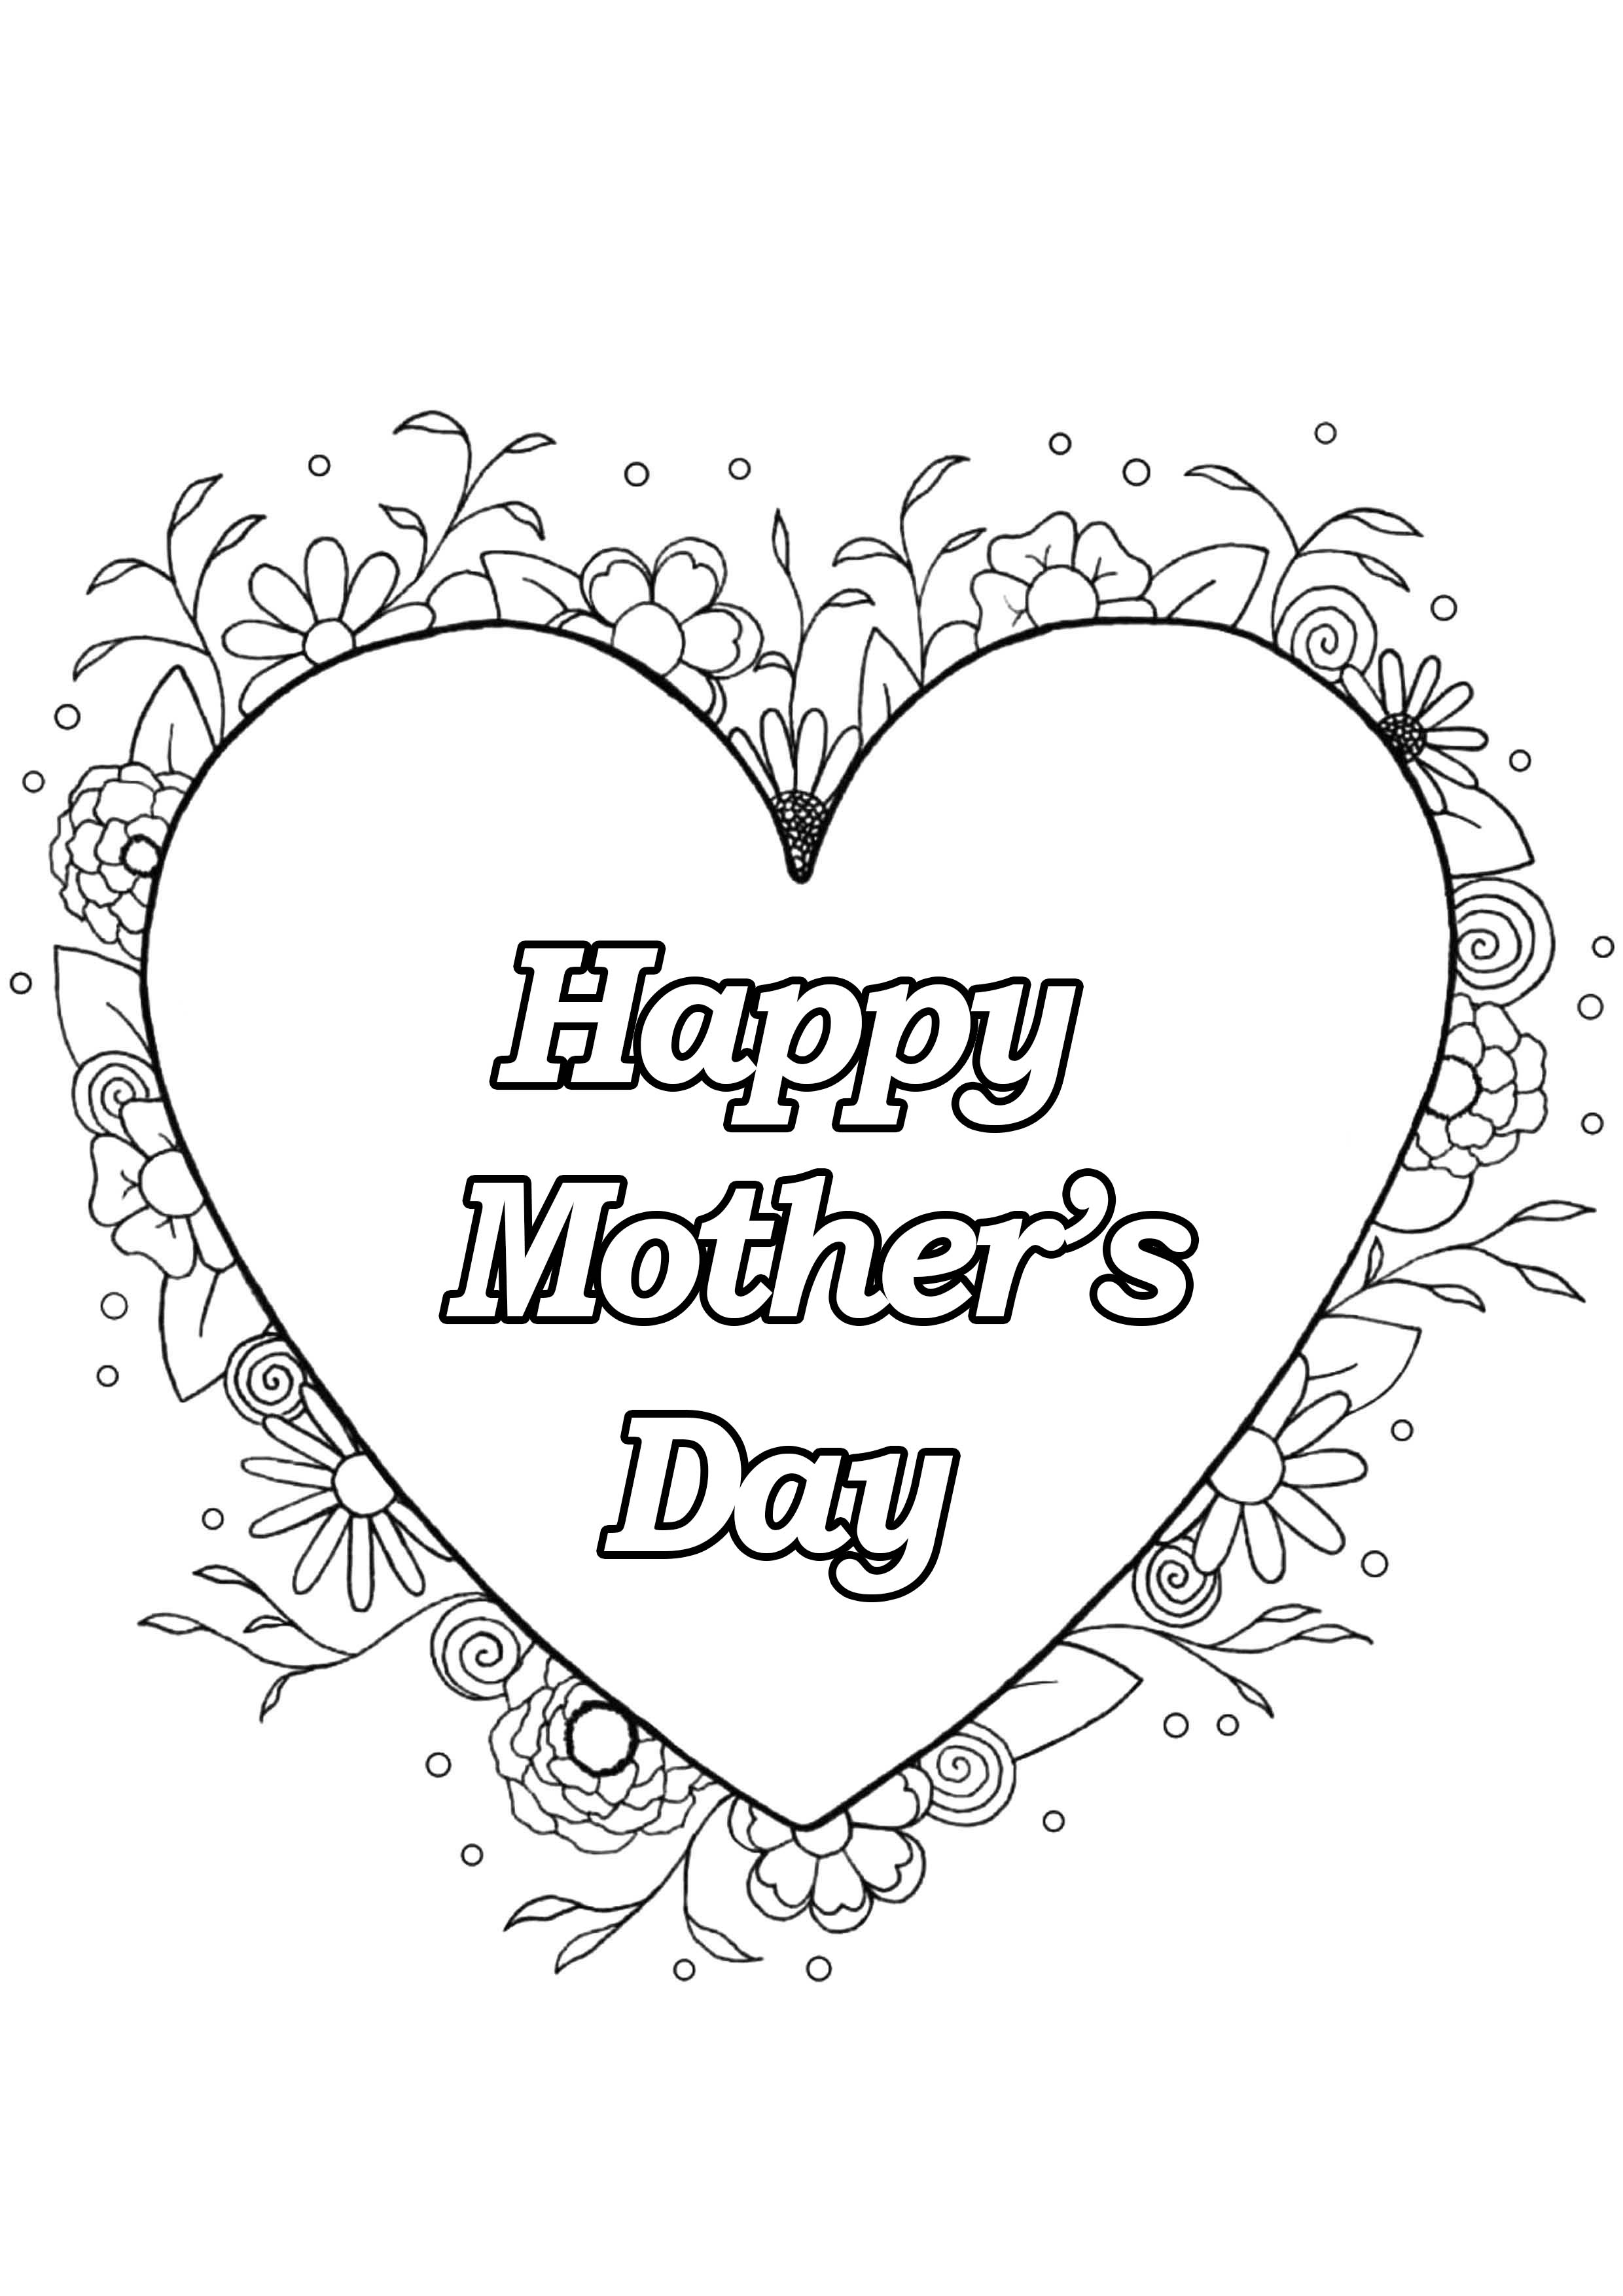 30-coloring-pages-for-mothers-day-zsksydny-coloring-pages